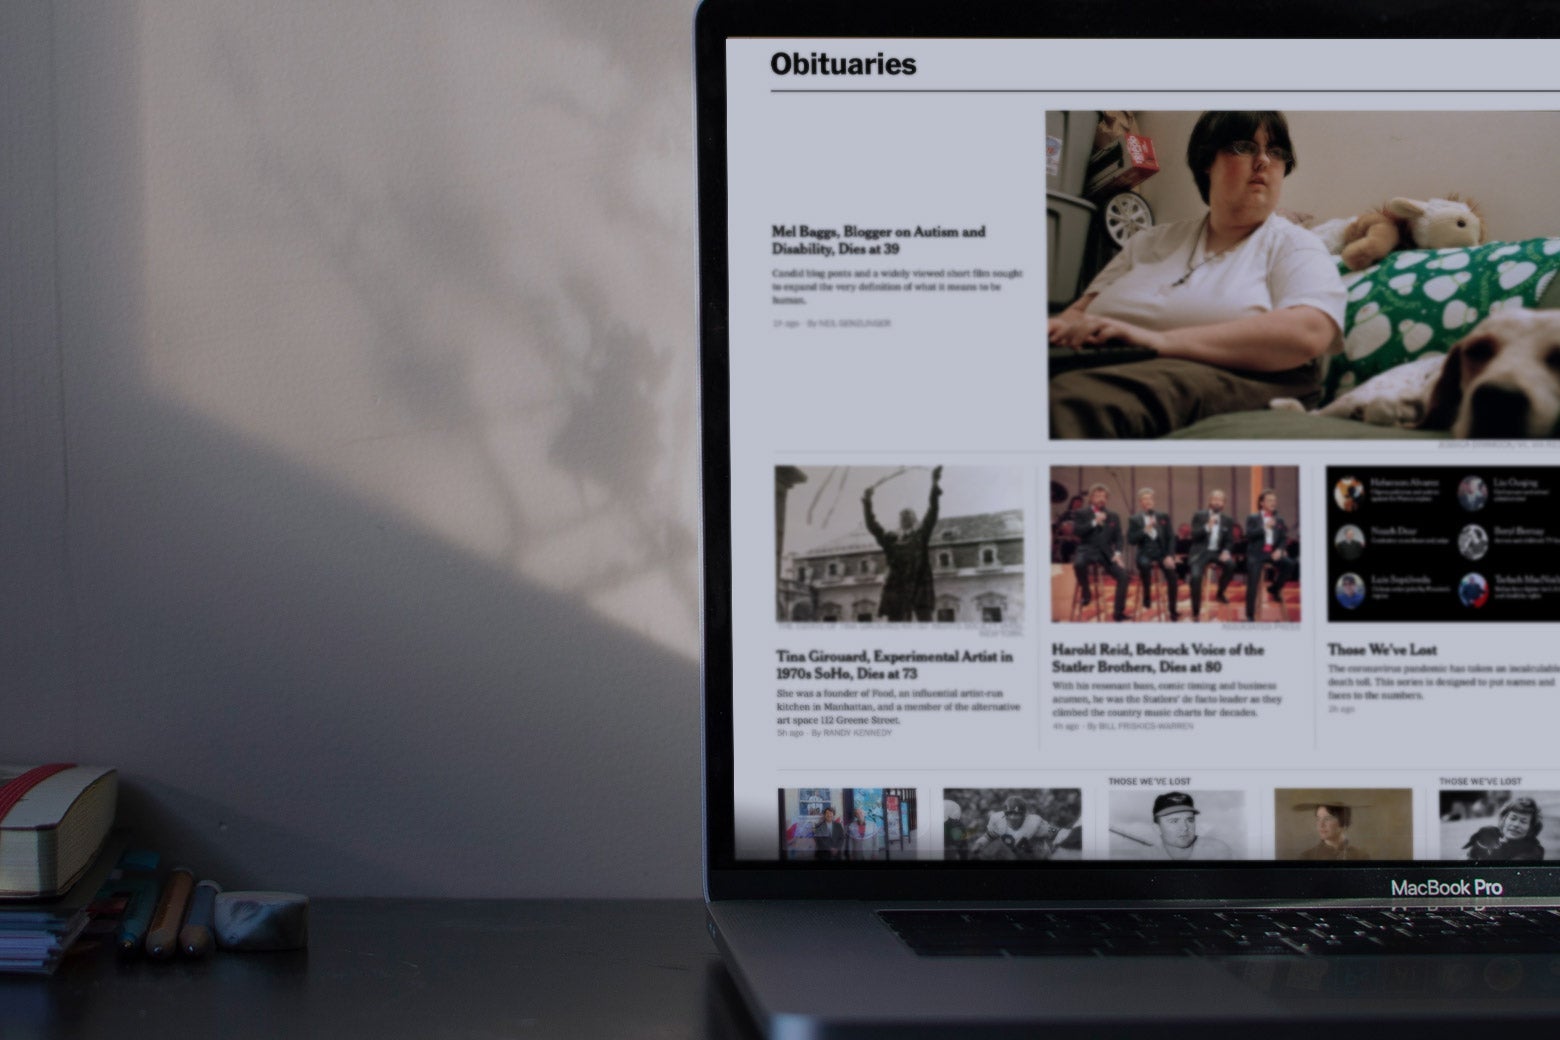 The New York Times Obituaries page on a laptop on a desk.